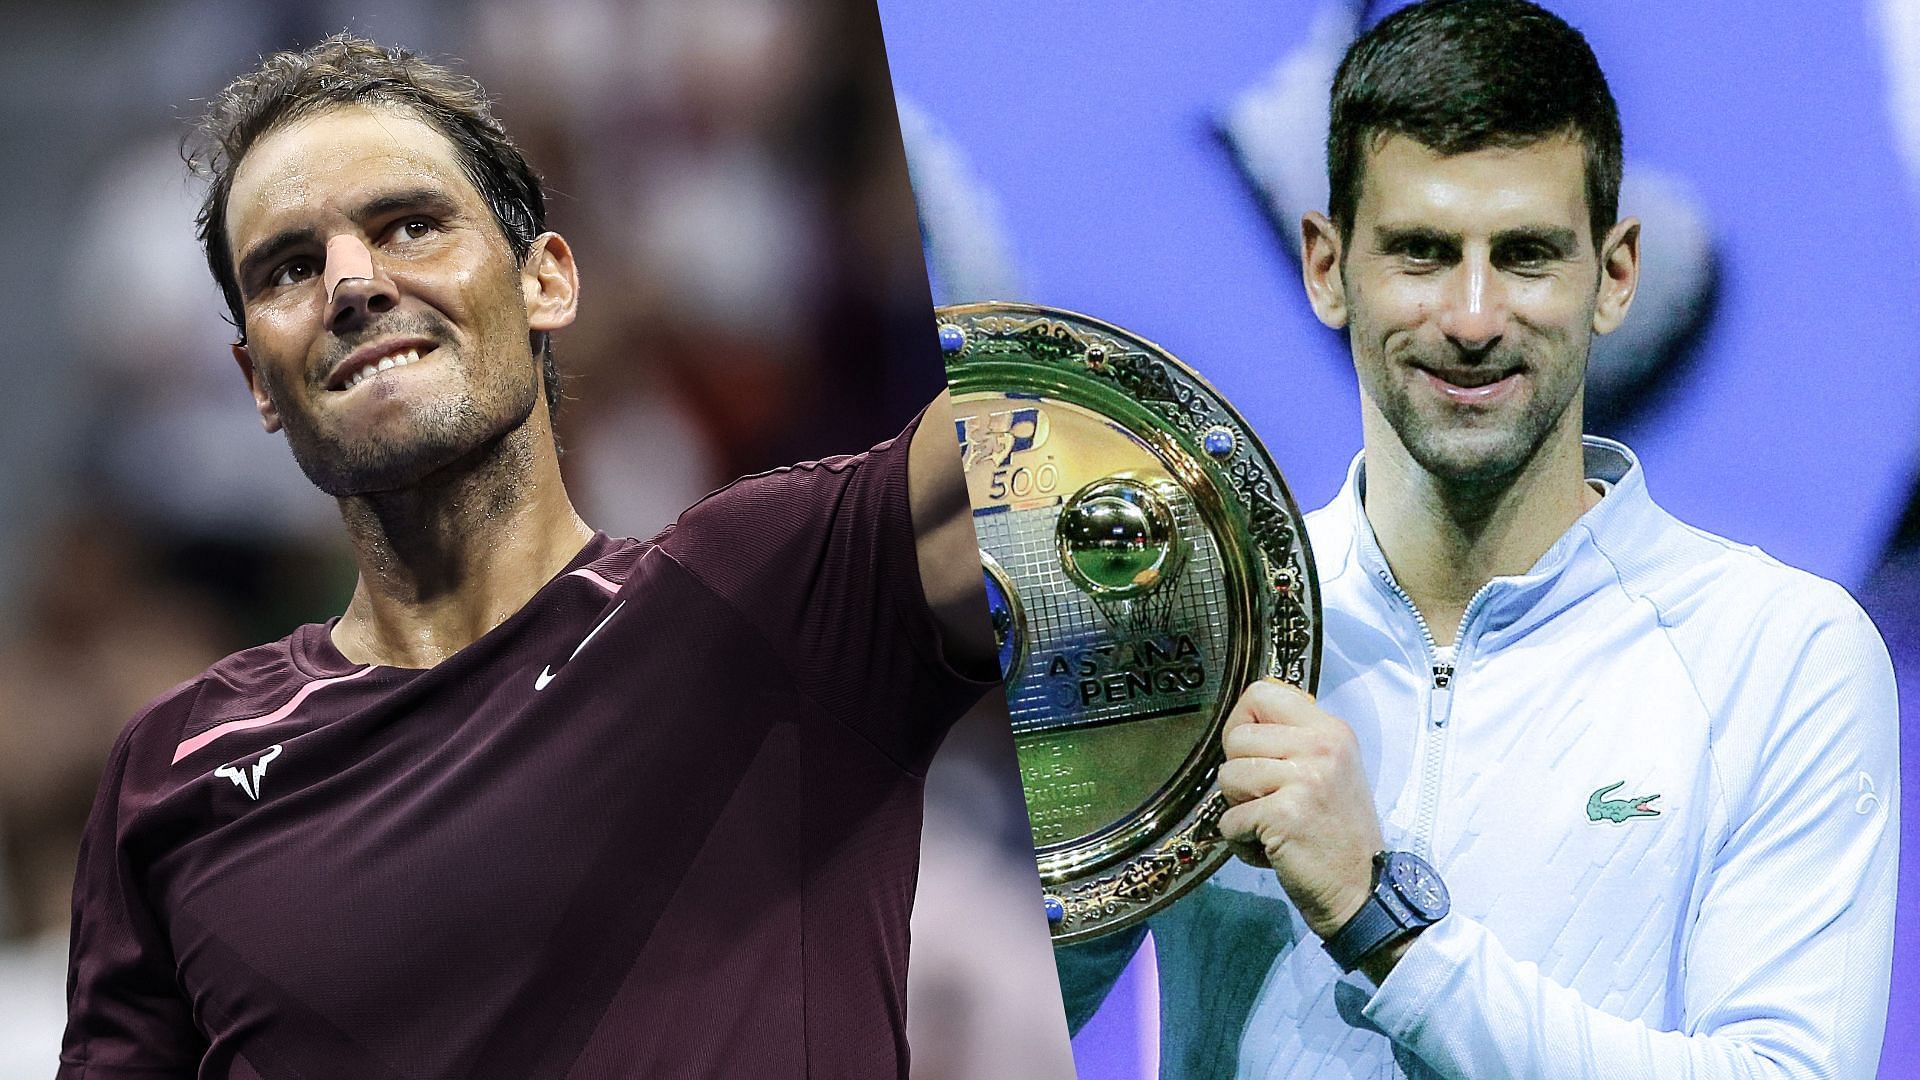 Rafael Nadal and Novak Djokovic are two of the favorites to take home the 2-22 Paris Masters title.